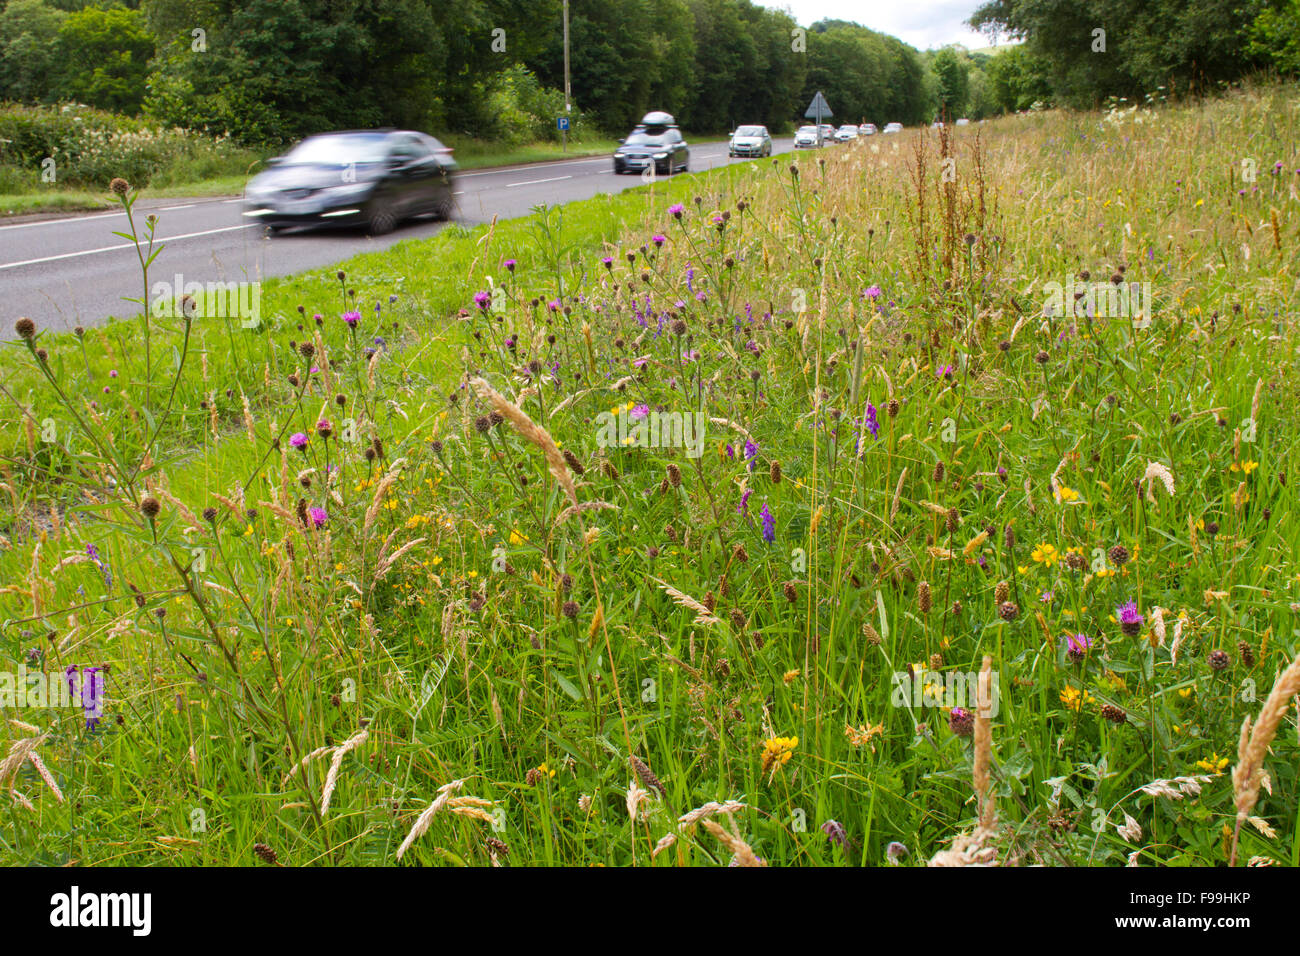 Common Knapweed (Centaurea nigra) and other wildflowers on a road verge. A470 near Llanidloes, Powys, Wales, July. Stock Photo